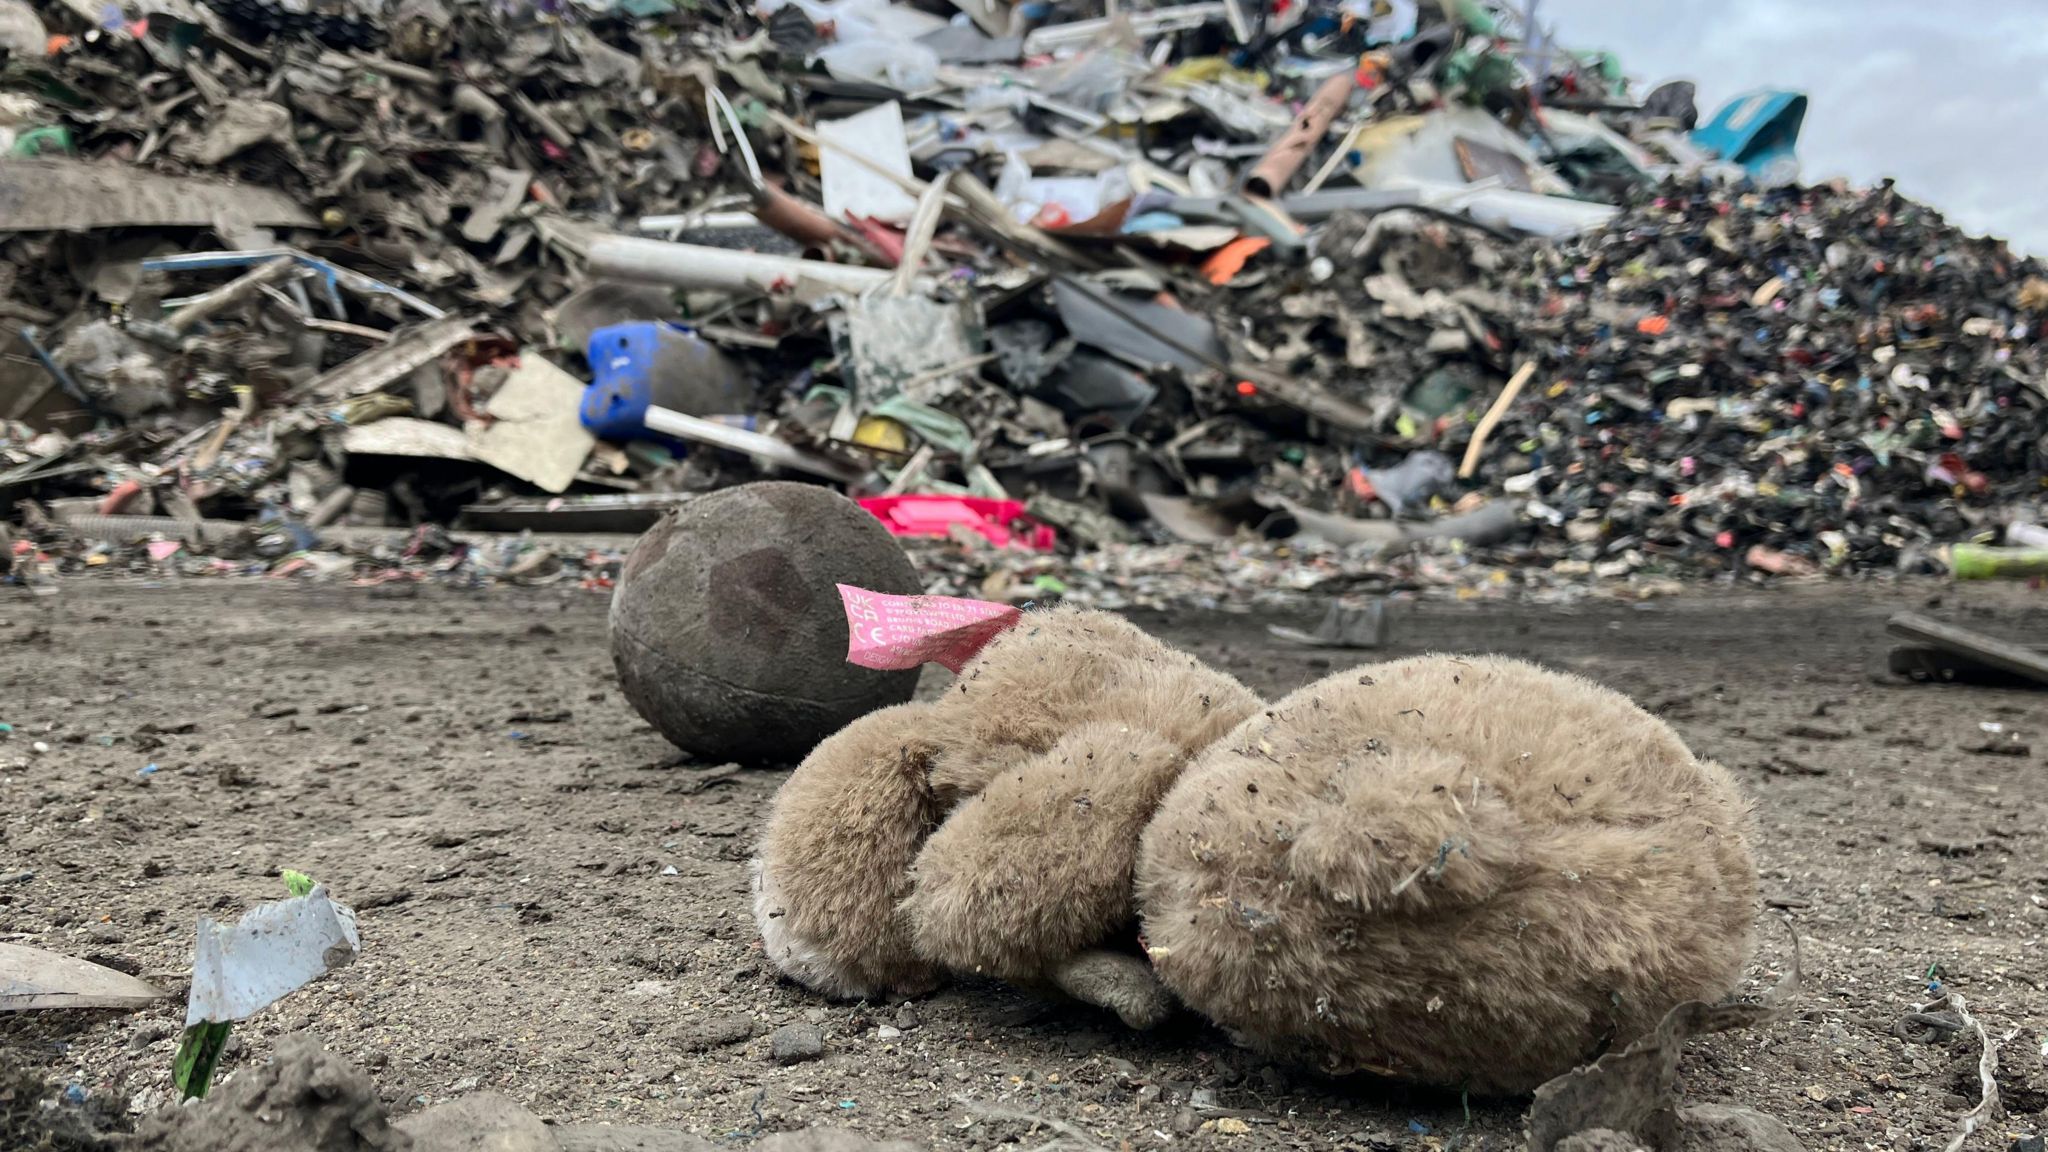 A soft toy and ball lying in front of a large pile of rubbish